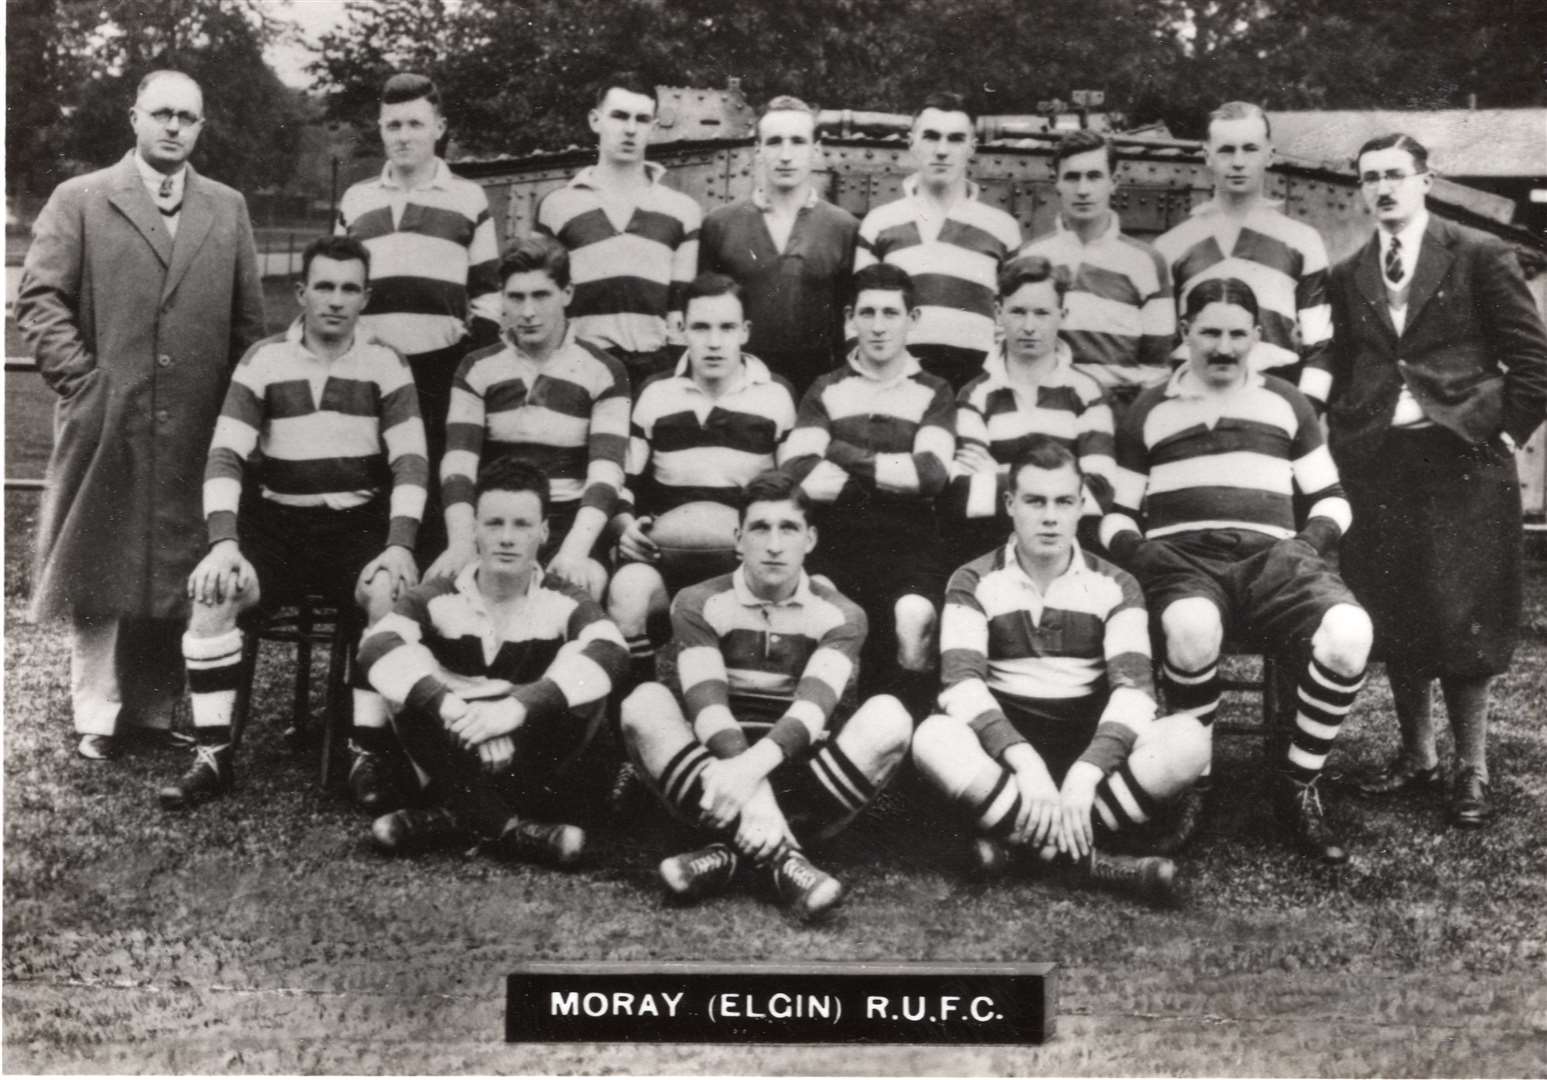 Moray Rugby Club commemorative photo